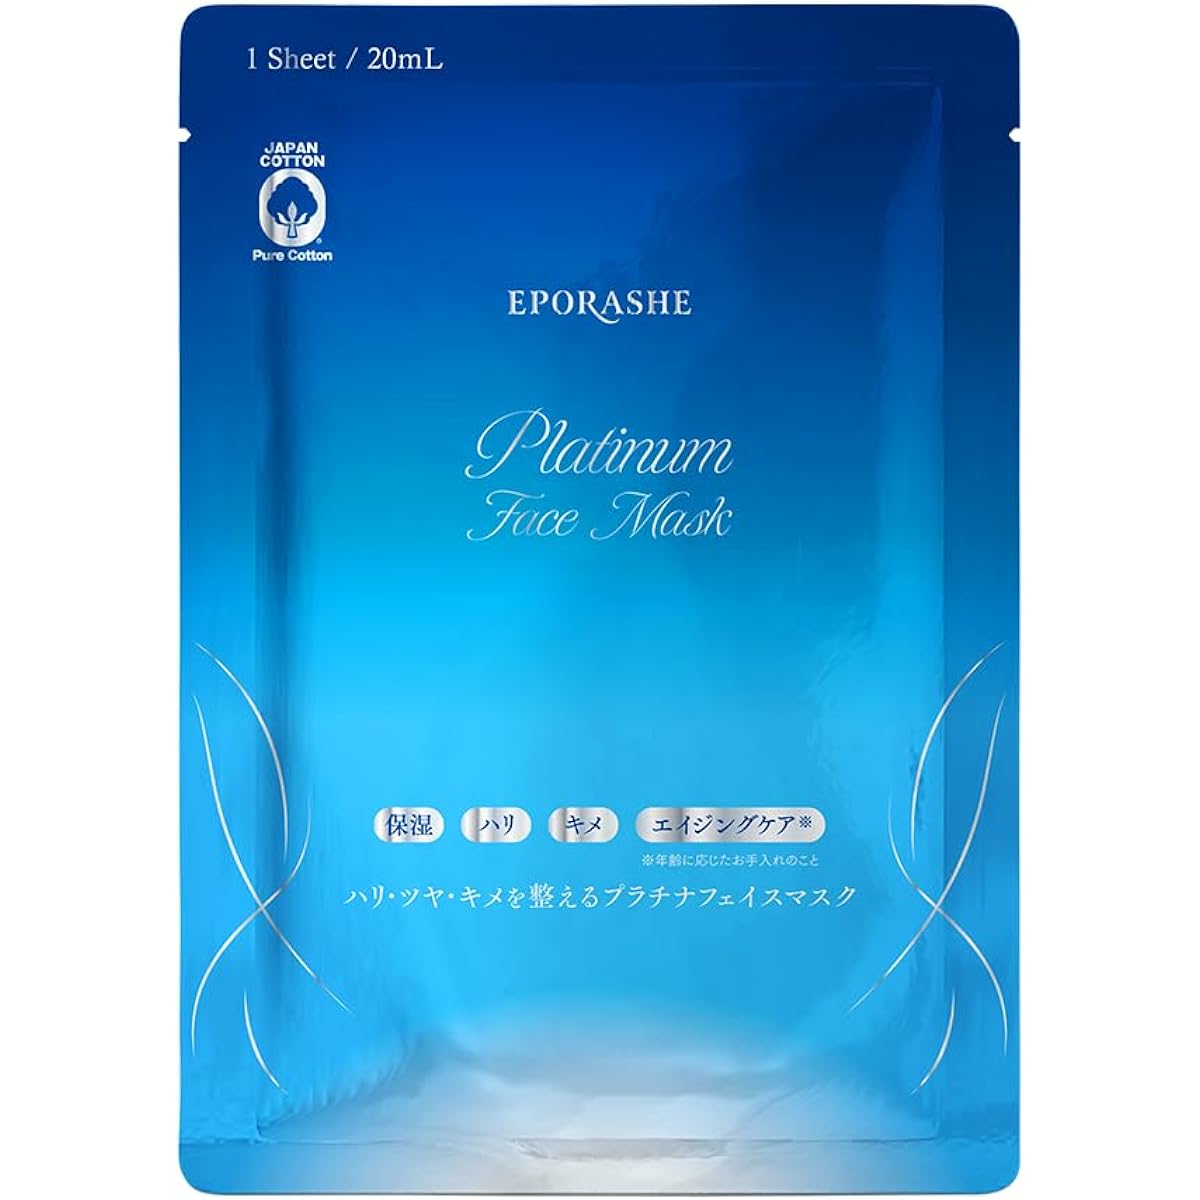 EPORASHE Platinum Face Mask (15 pieces) [Additive-free] Contains a large amount of EGF, water-soluble proteoglycan, human ceramide, deer extract, etc. to improve firmness, shine, and texture. Made of 100% pure domestic cotton.